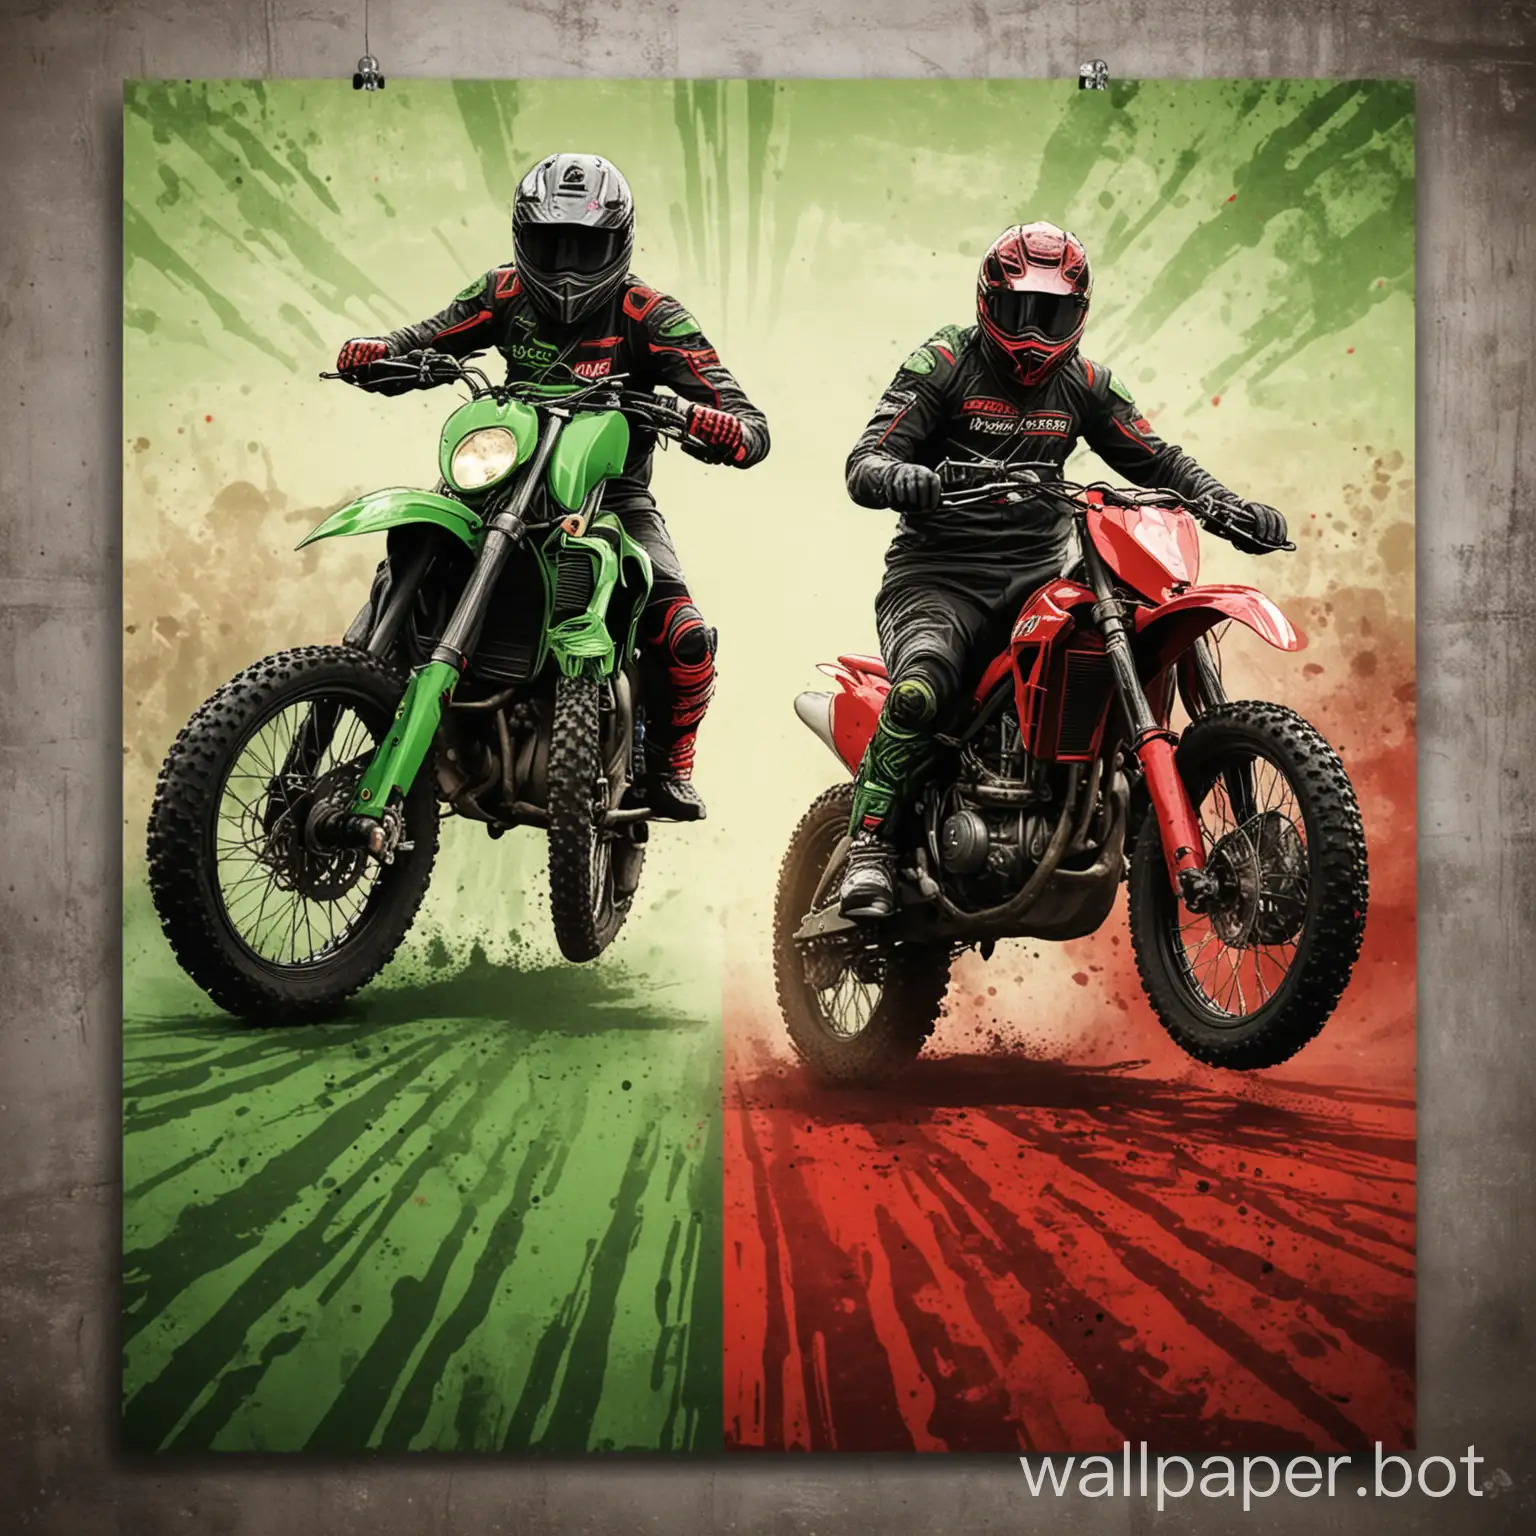 background for poster, moto race, two bikers, green  and red